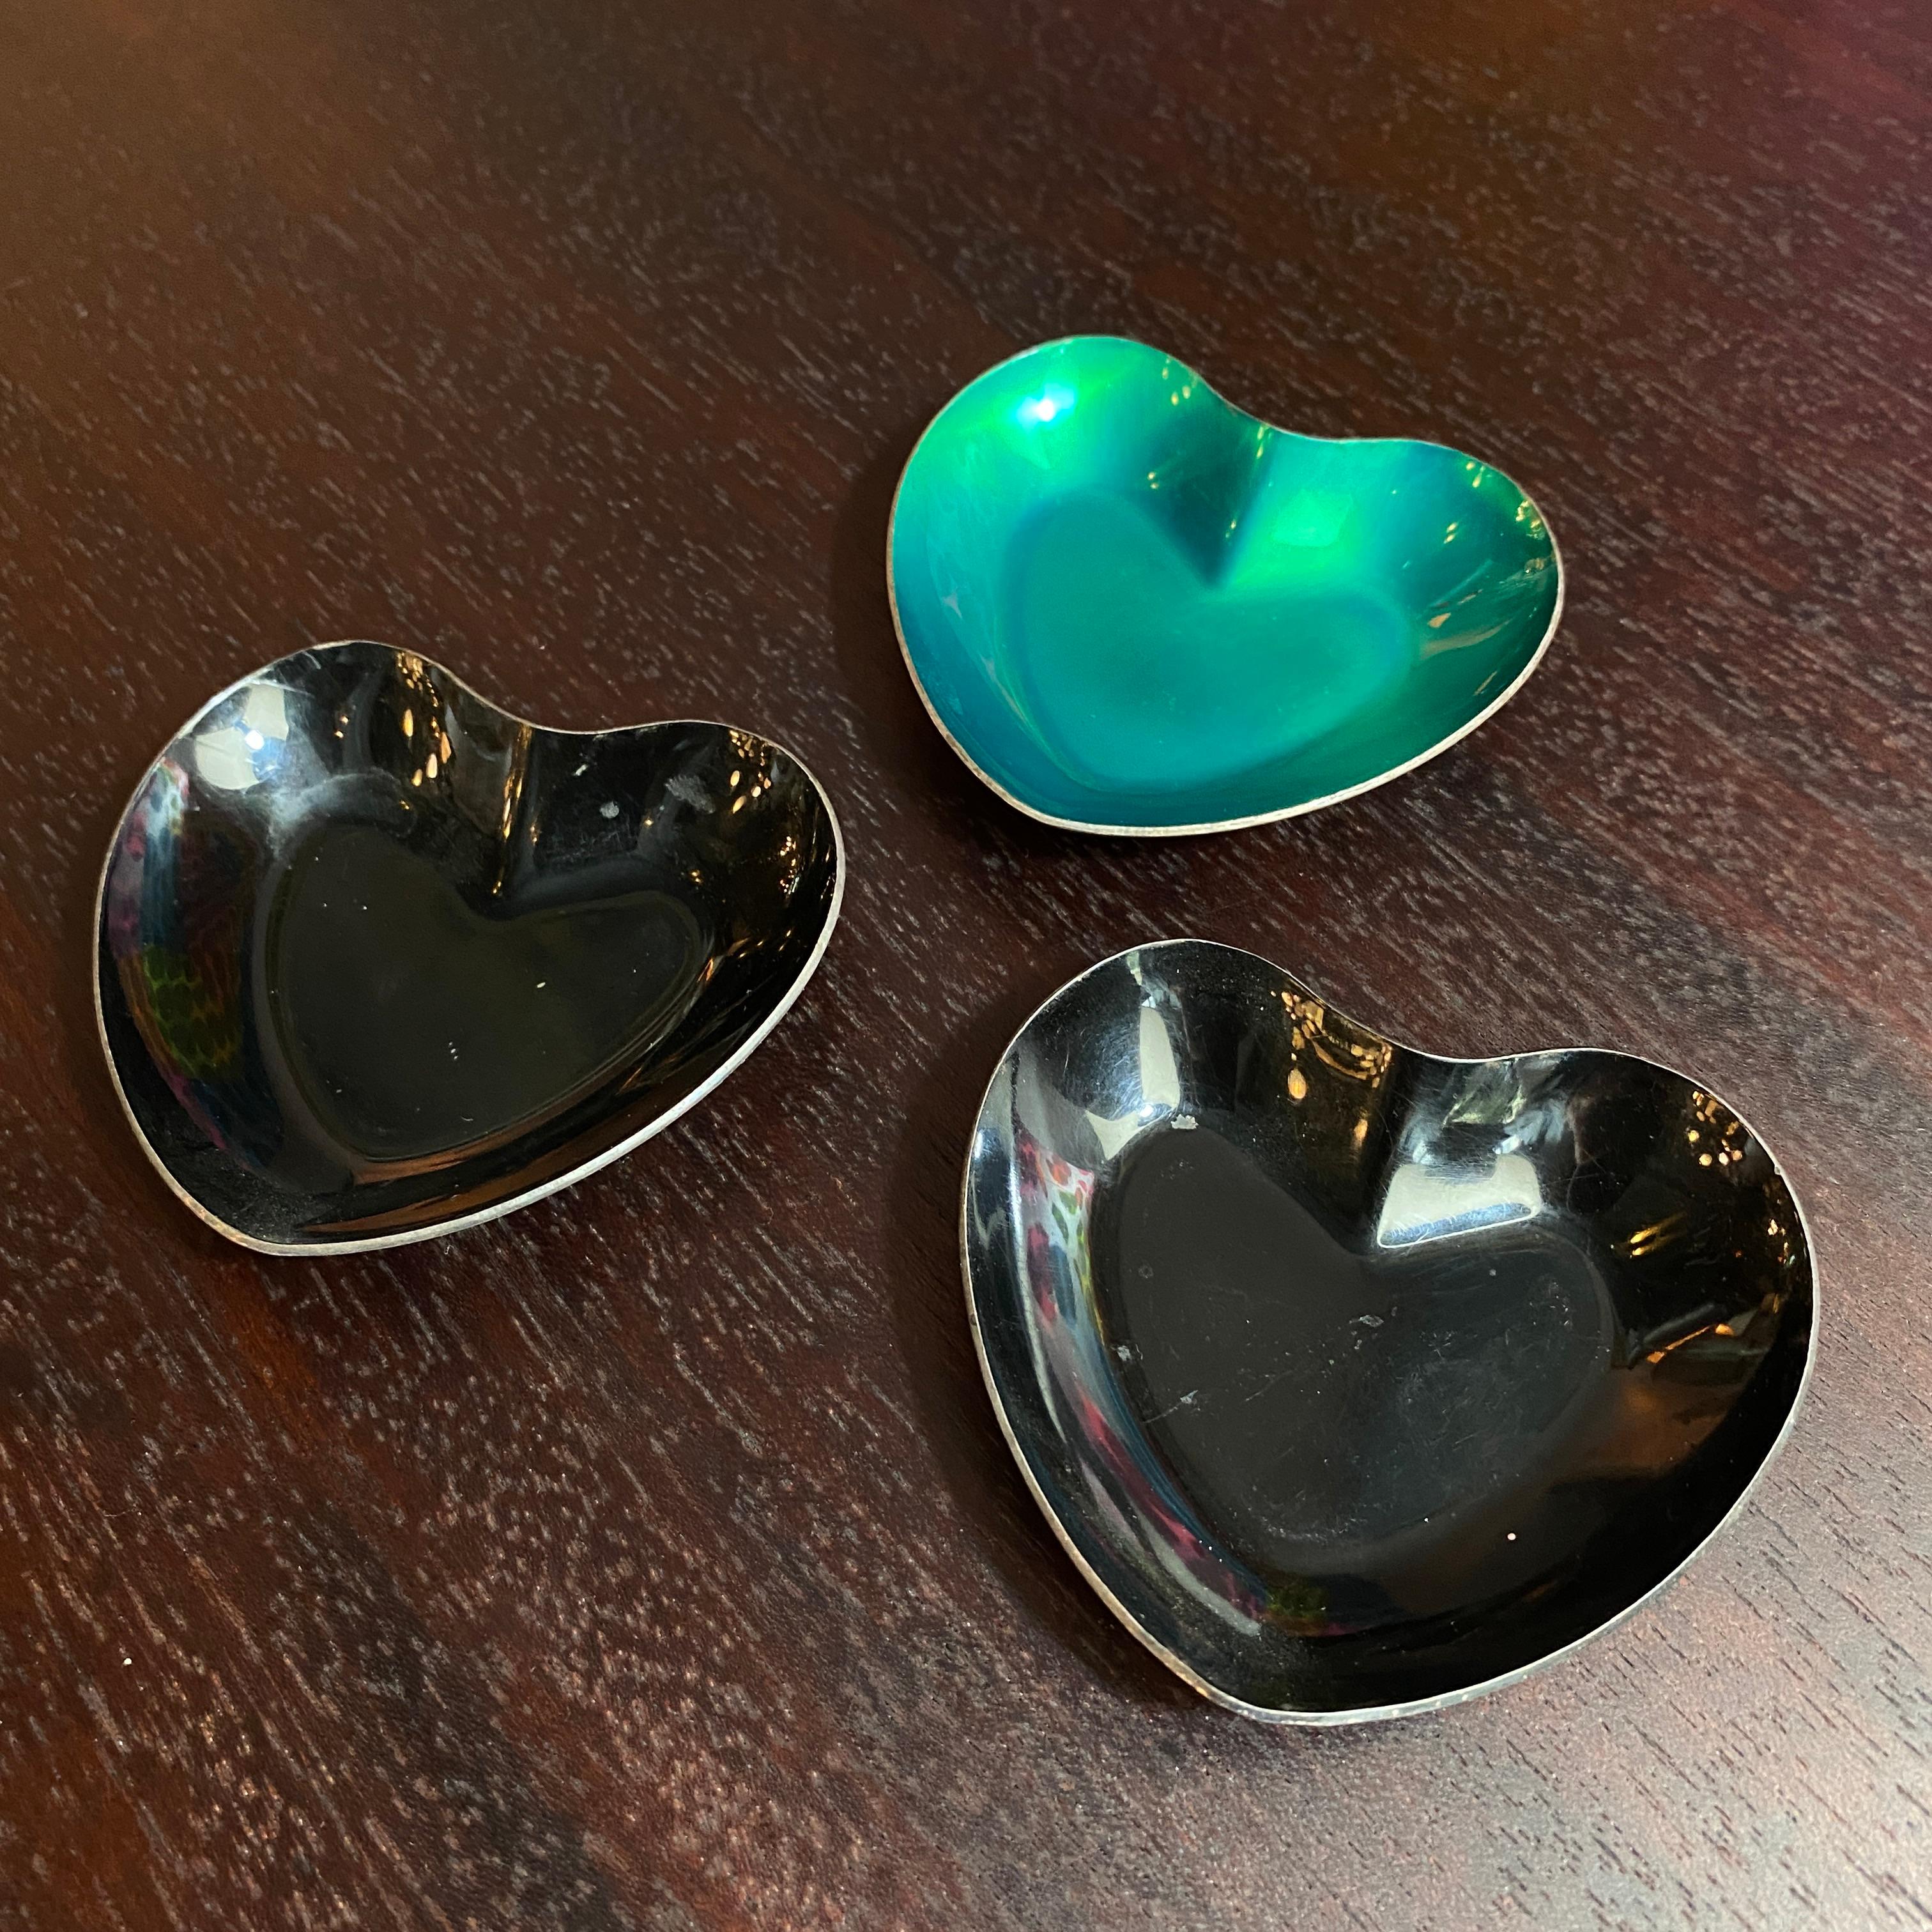 Trio of petite Danish modern, colored enamel, sterling silver, heart-shaped stacking dishes in shimmering green and glossy black. Marked Meka Denmark on the back. This colorful set works as serving dishes, pin trays or ring holders. 